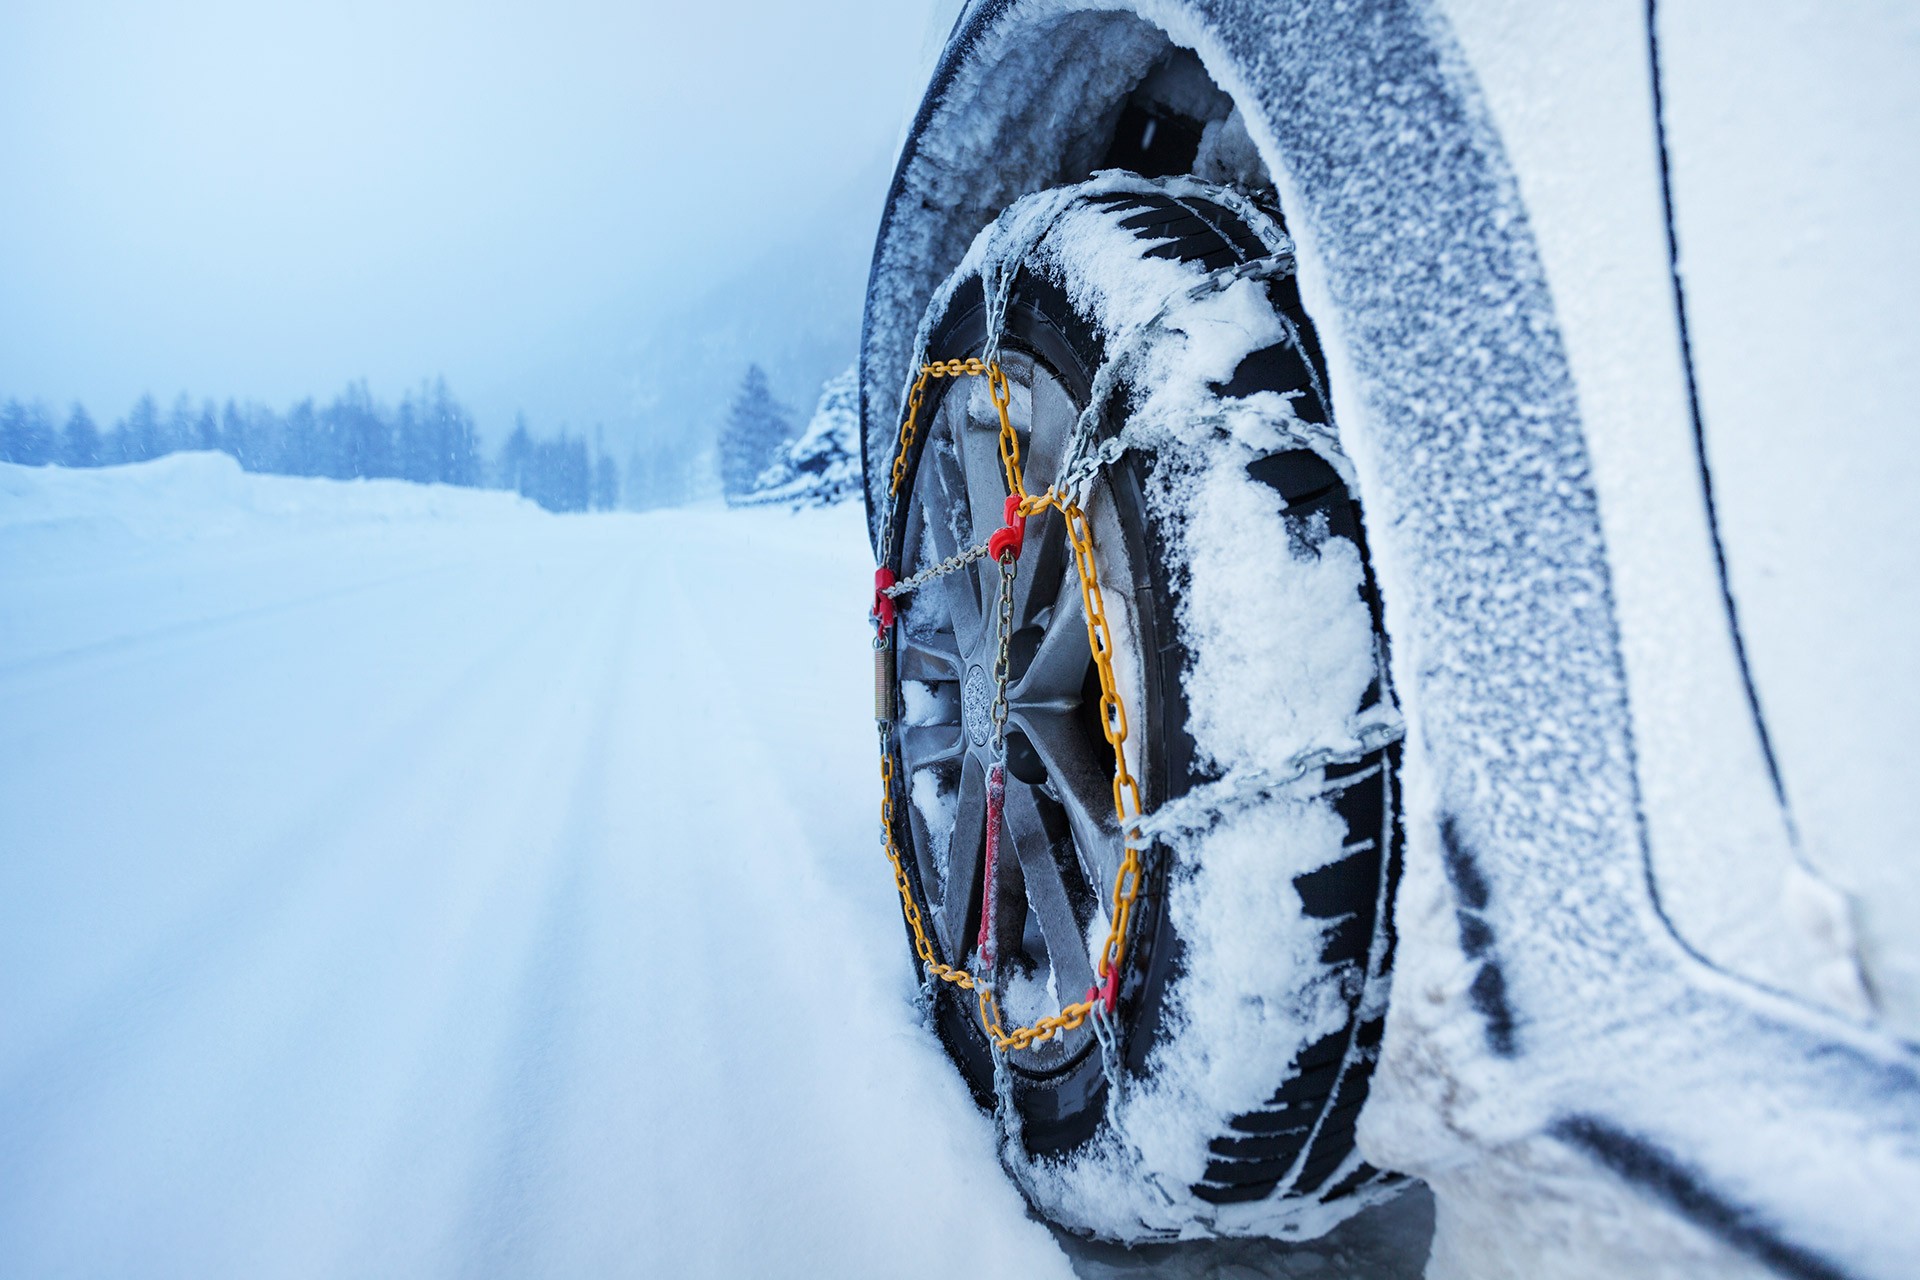 How to easily put on snow chains on car tires